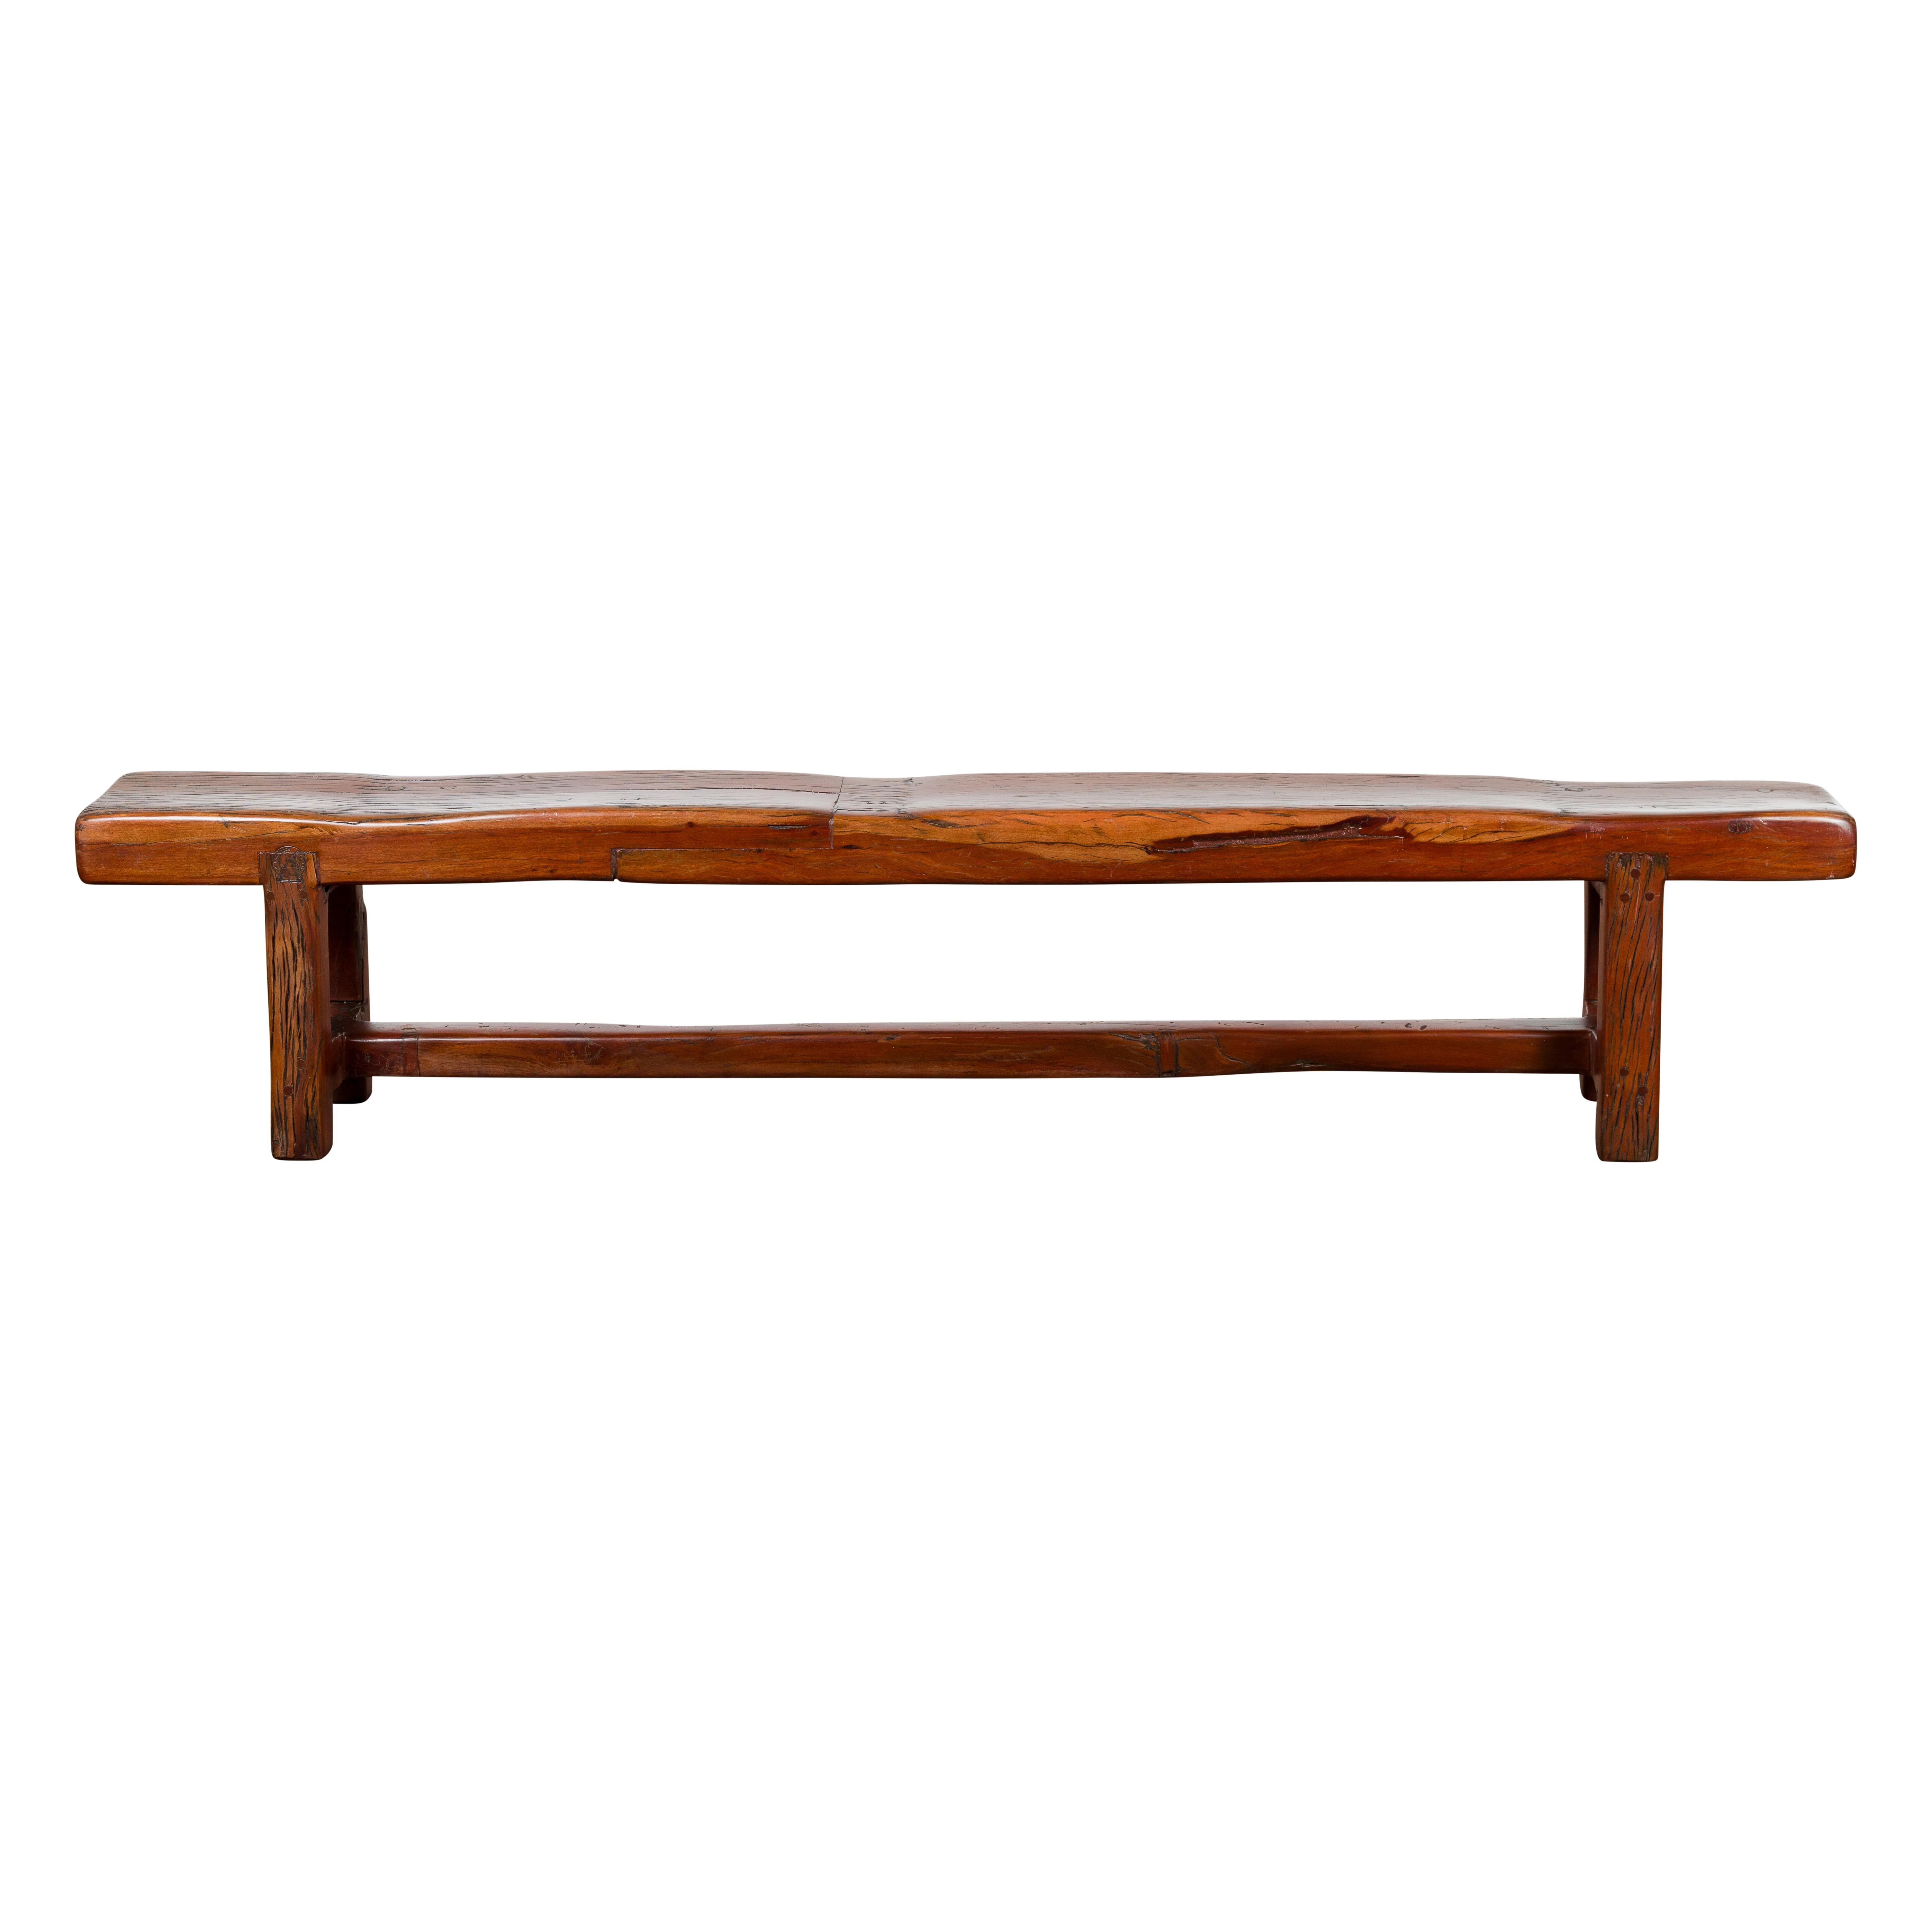 Rustic Long A-Frame Wooden Bench with Cross Stretcher and Splaying Legs For Sale 14